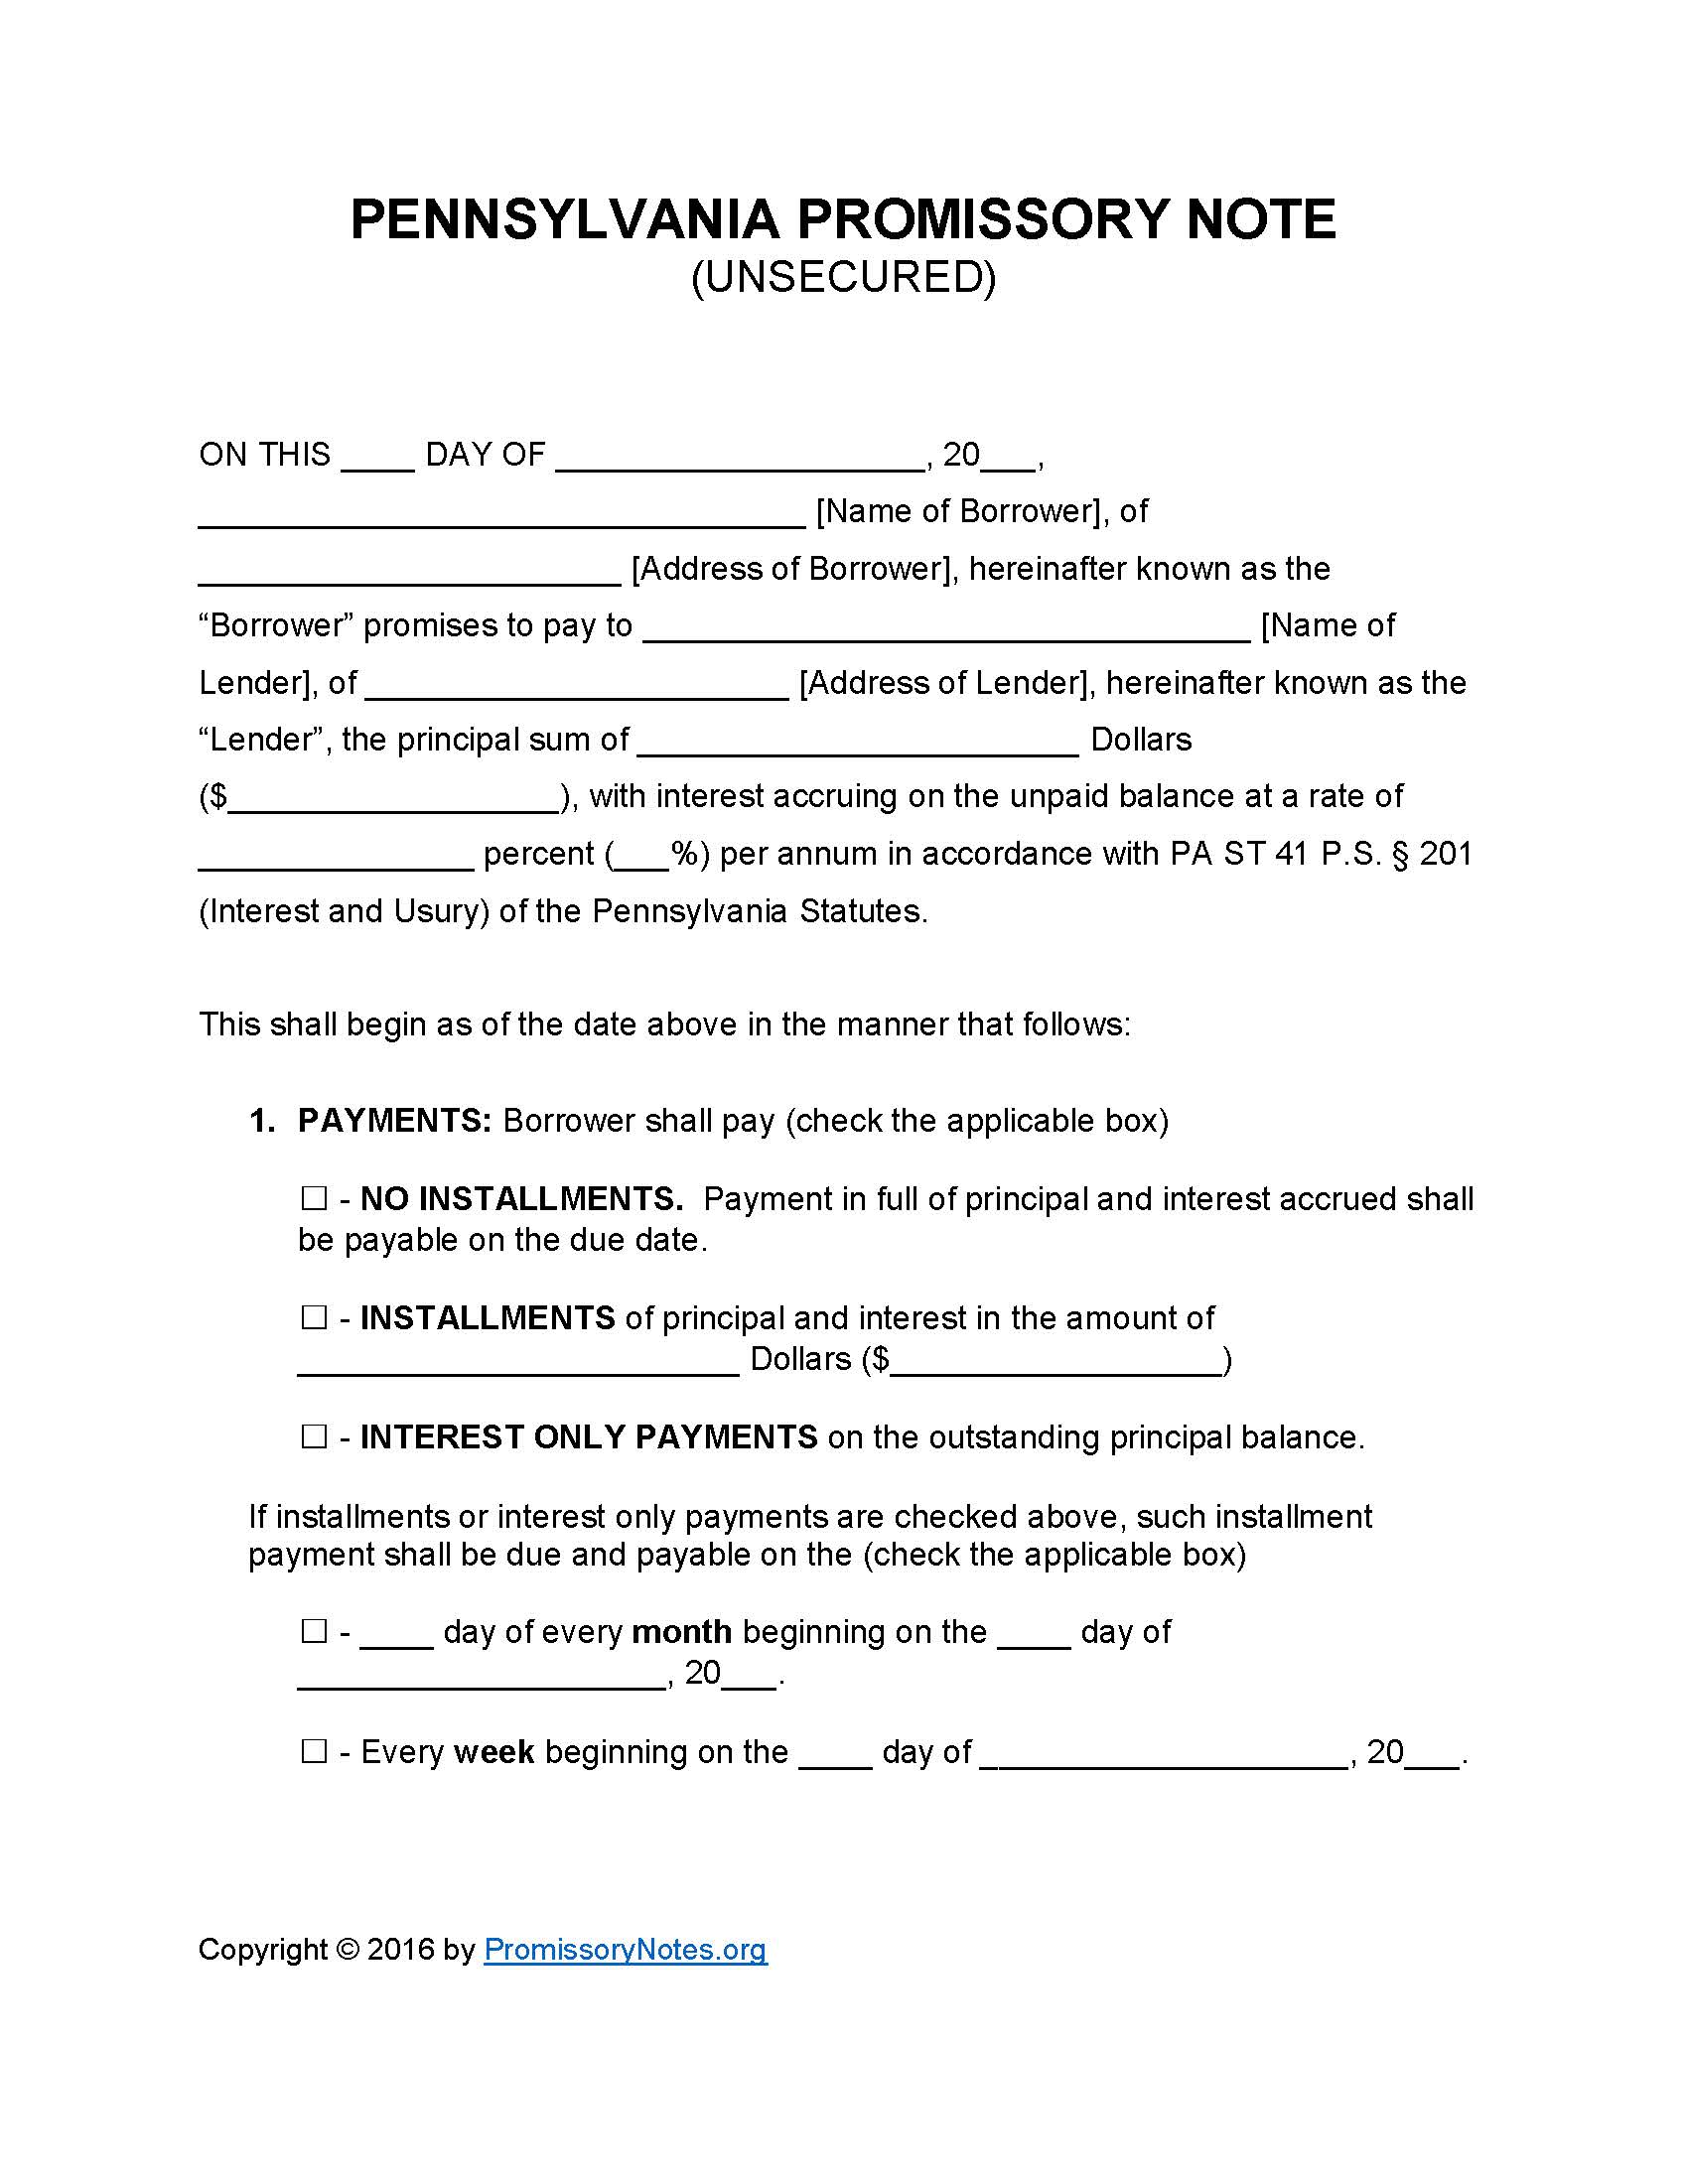 pennsylvania-unsecured-promissory-note-form